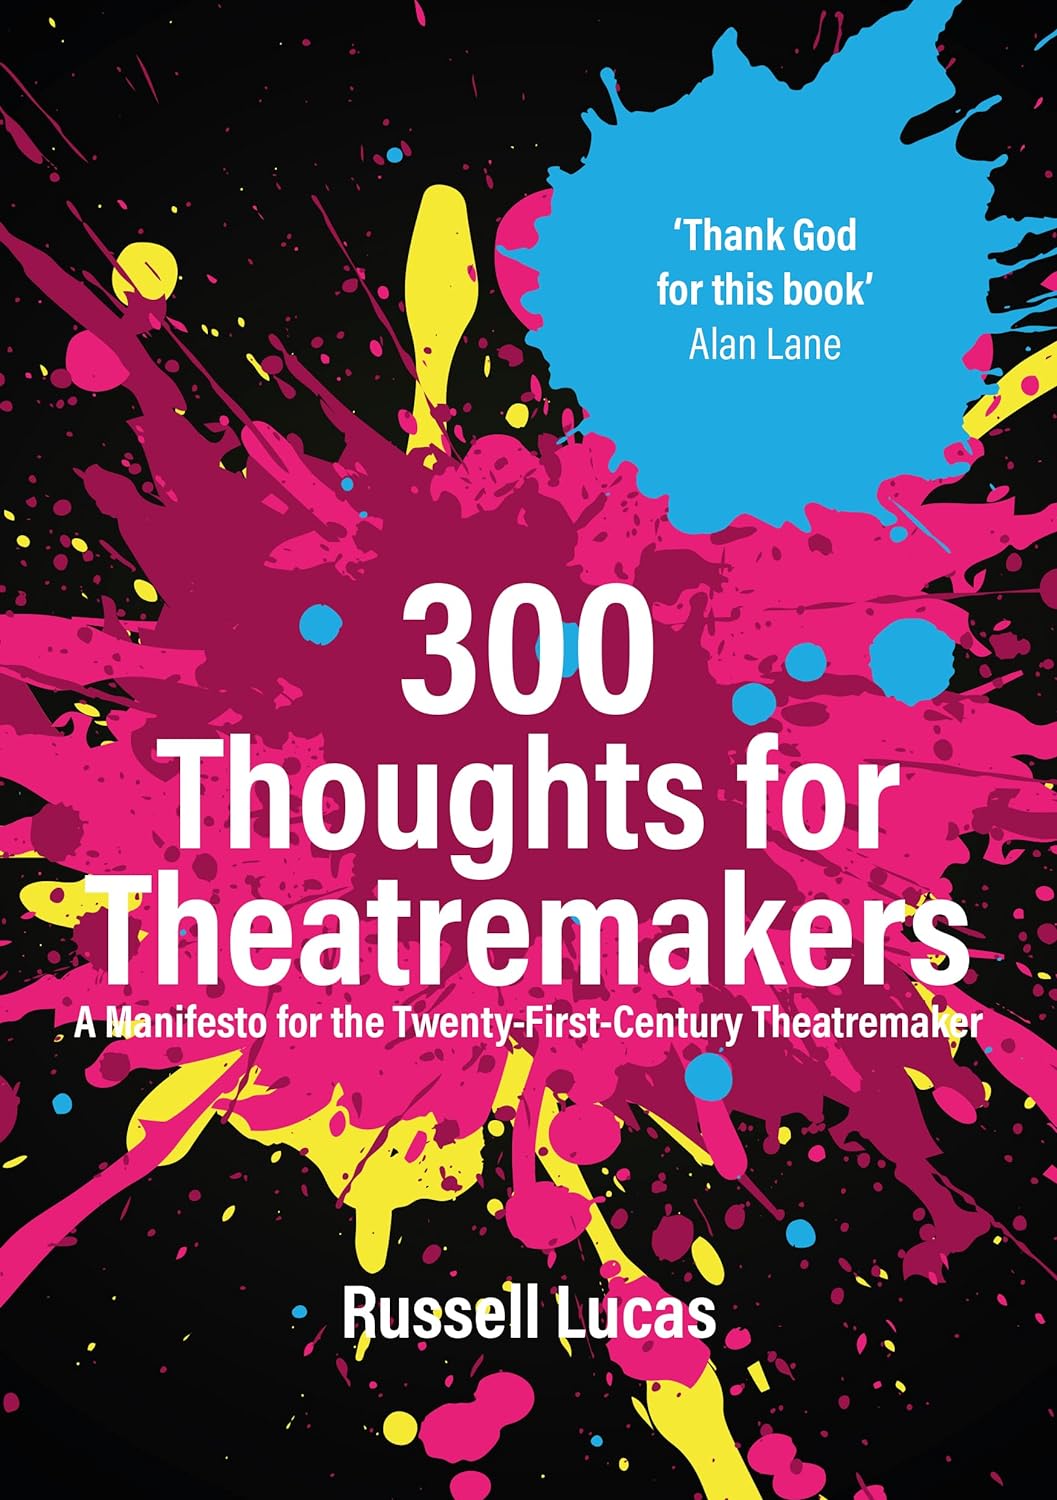 300 Thoughts for Theatremakers: A Manifesto for the Twenty-First-Century Theatremaker